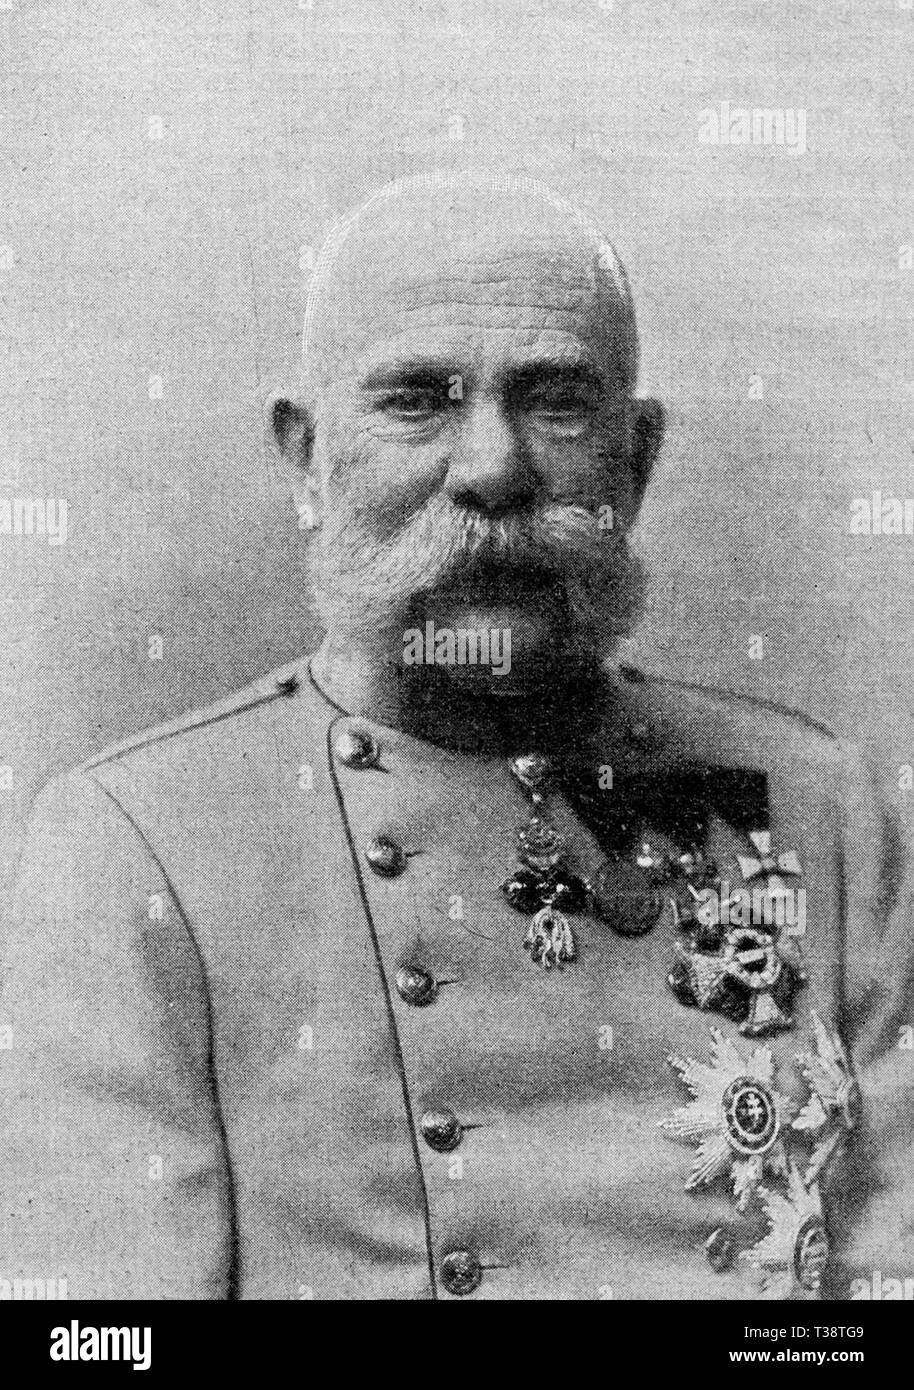 Franz Joseph I, Emperor of Austria. Digital improved reproduction from Illustrated overview of the life of mankind in the 19th century, 1901 edition, Marx publishing house, St. Petersburg. Stock Photo